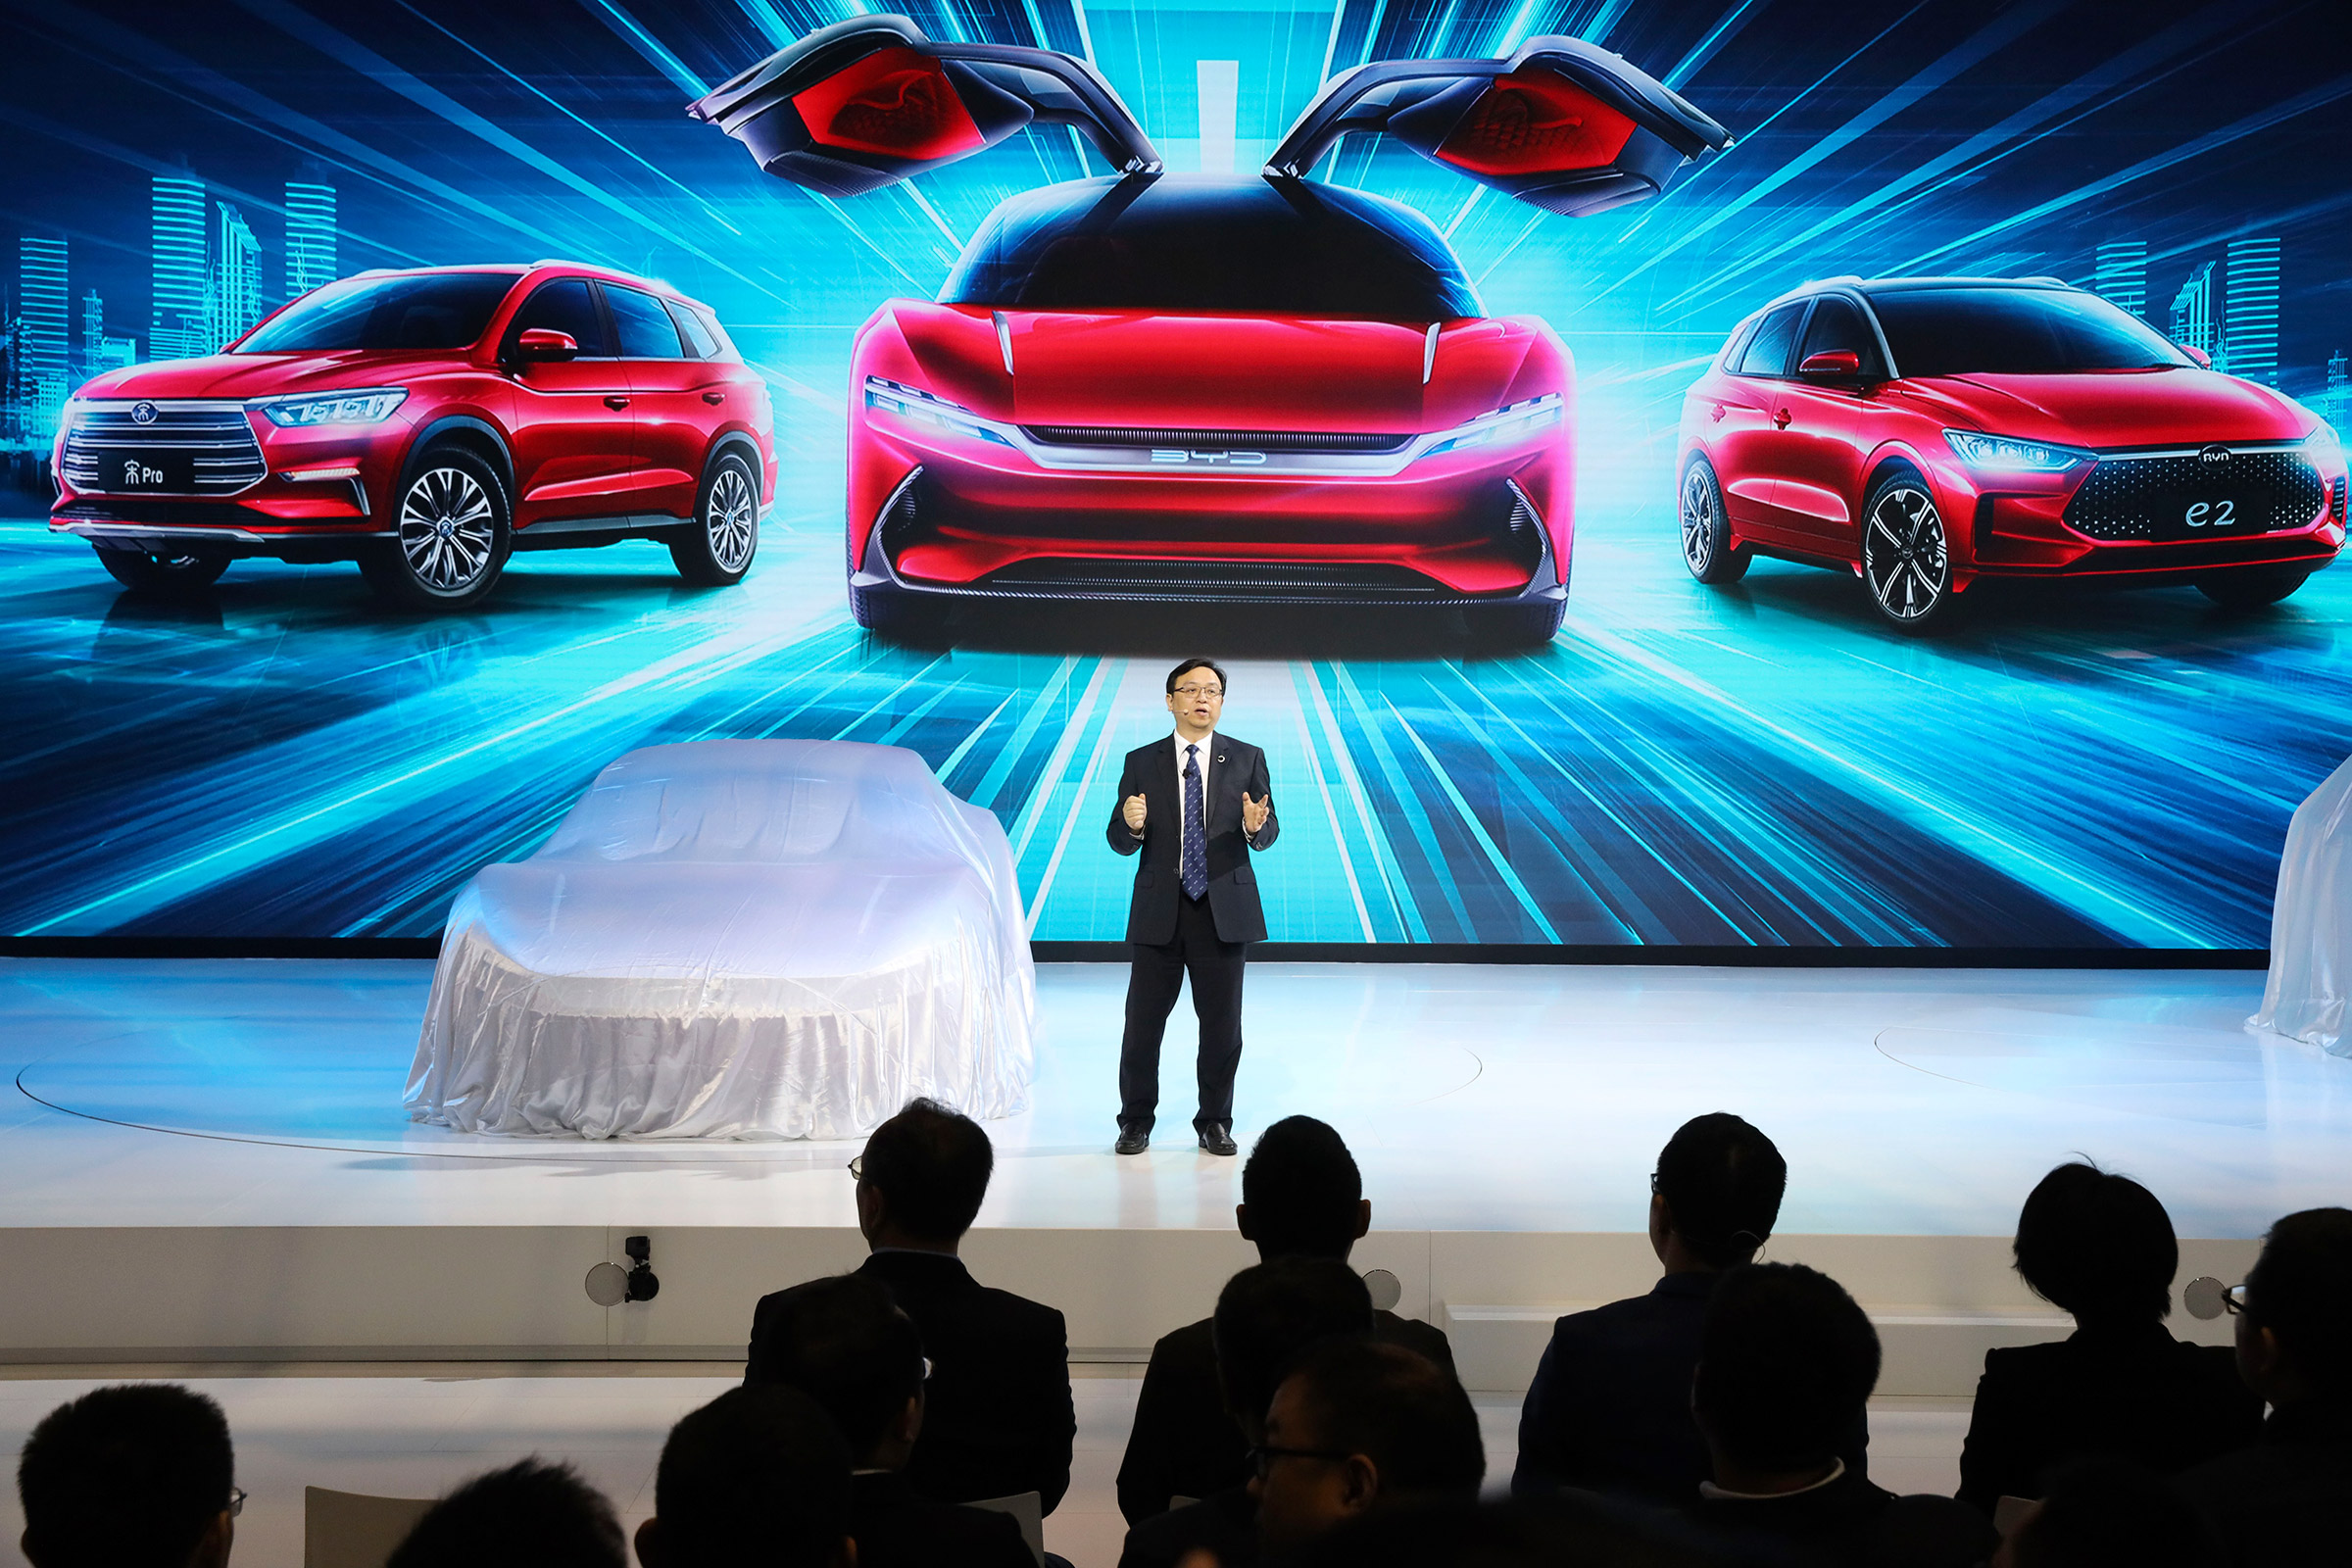 Wang Chuanfu, chairman and president of BYD Auto, at the the Auto Shanghai 2019 show in Shanghai. (Ng Han Guan—AP)